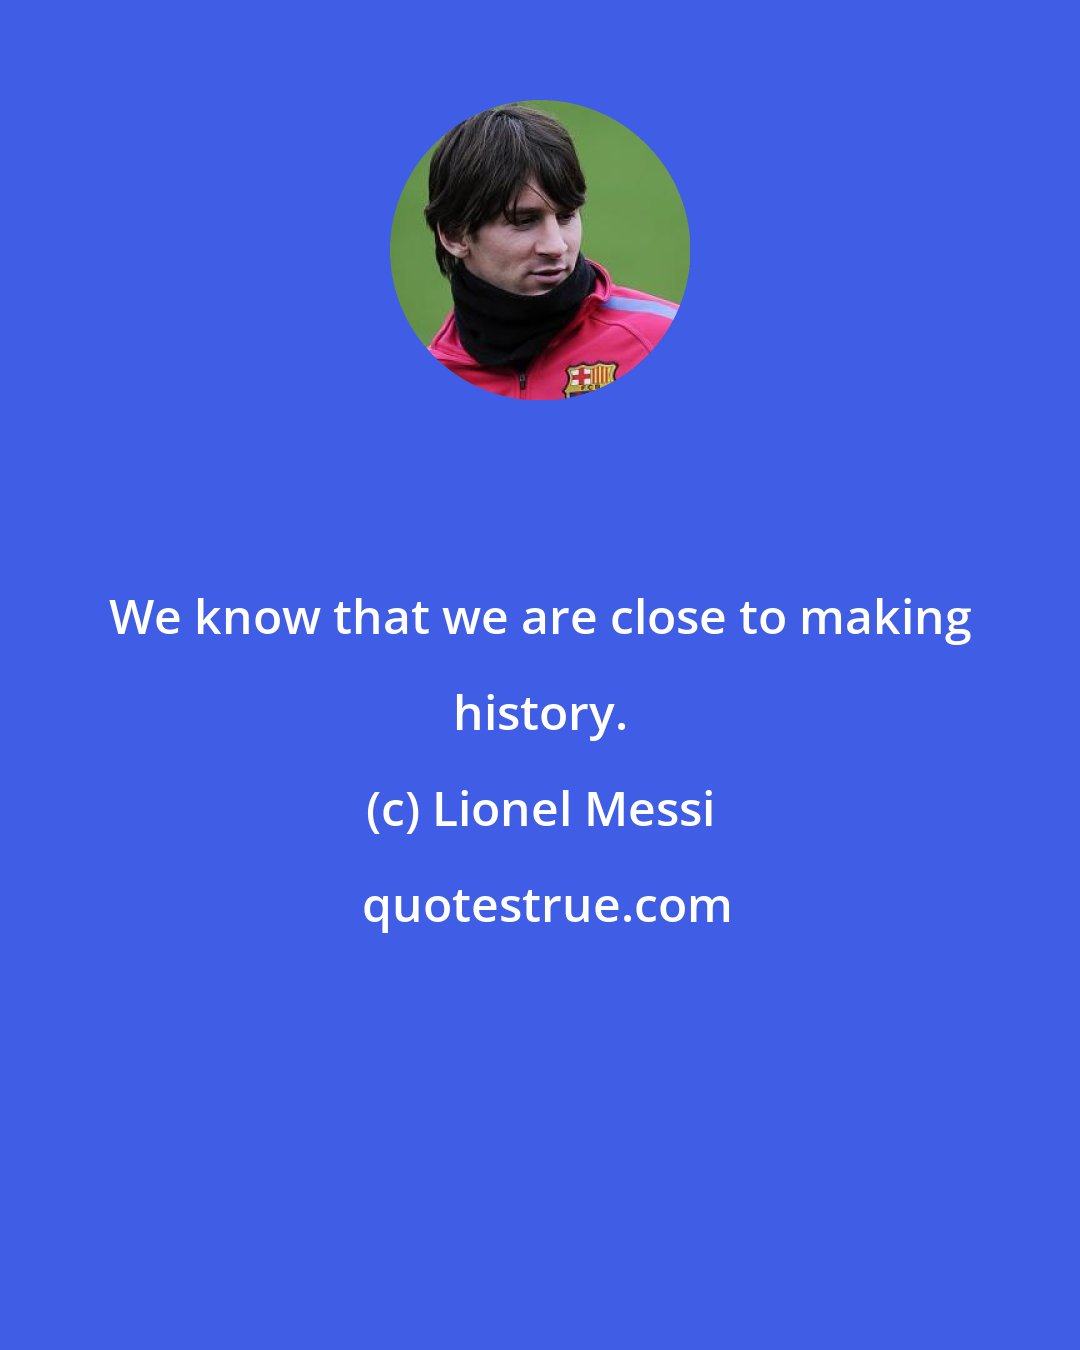 Lionel Messi: We know that we are close to making history.